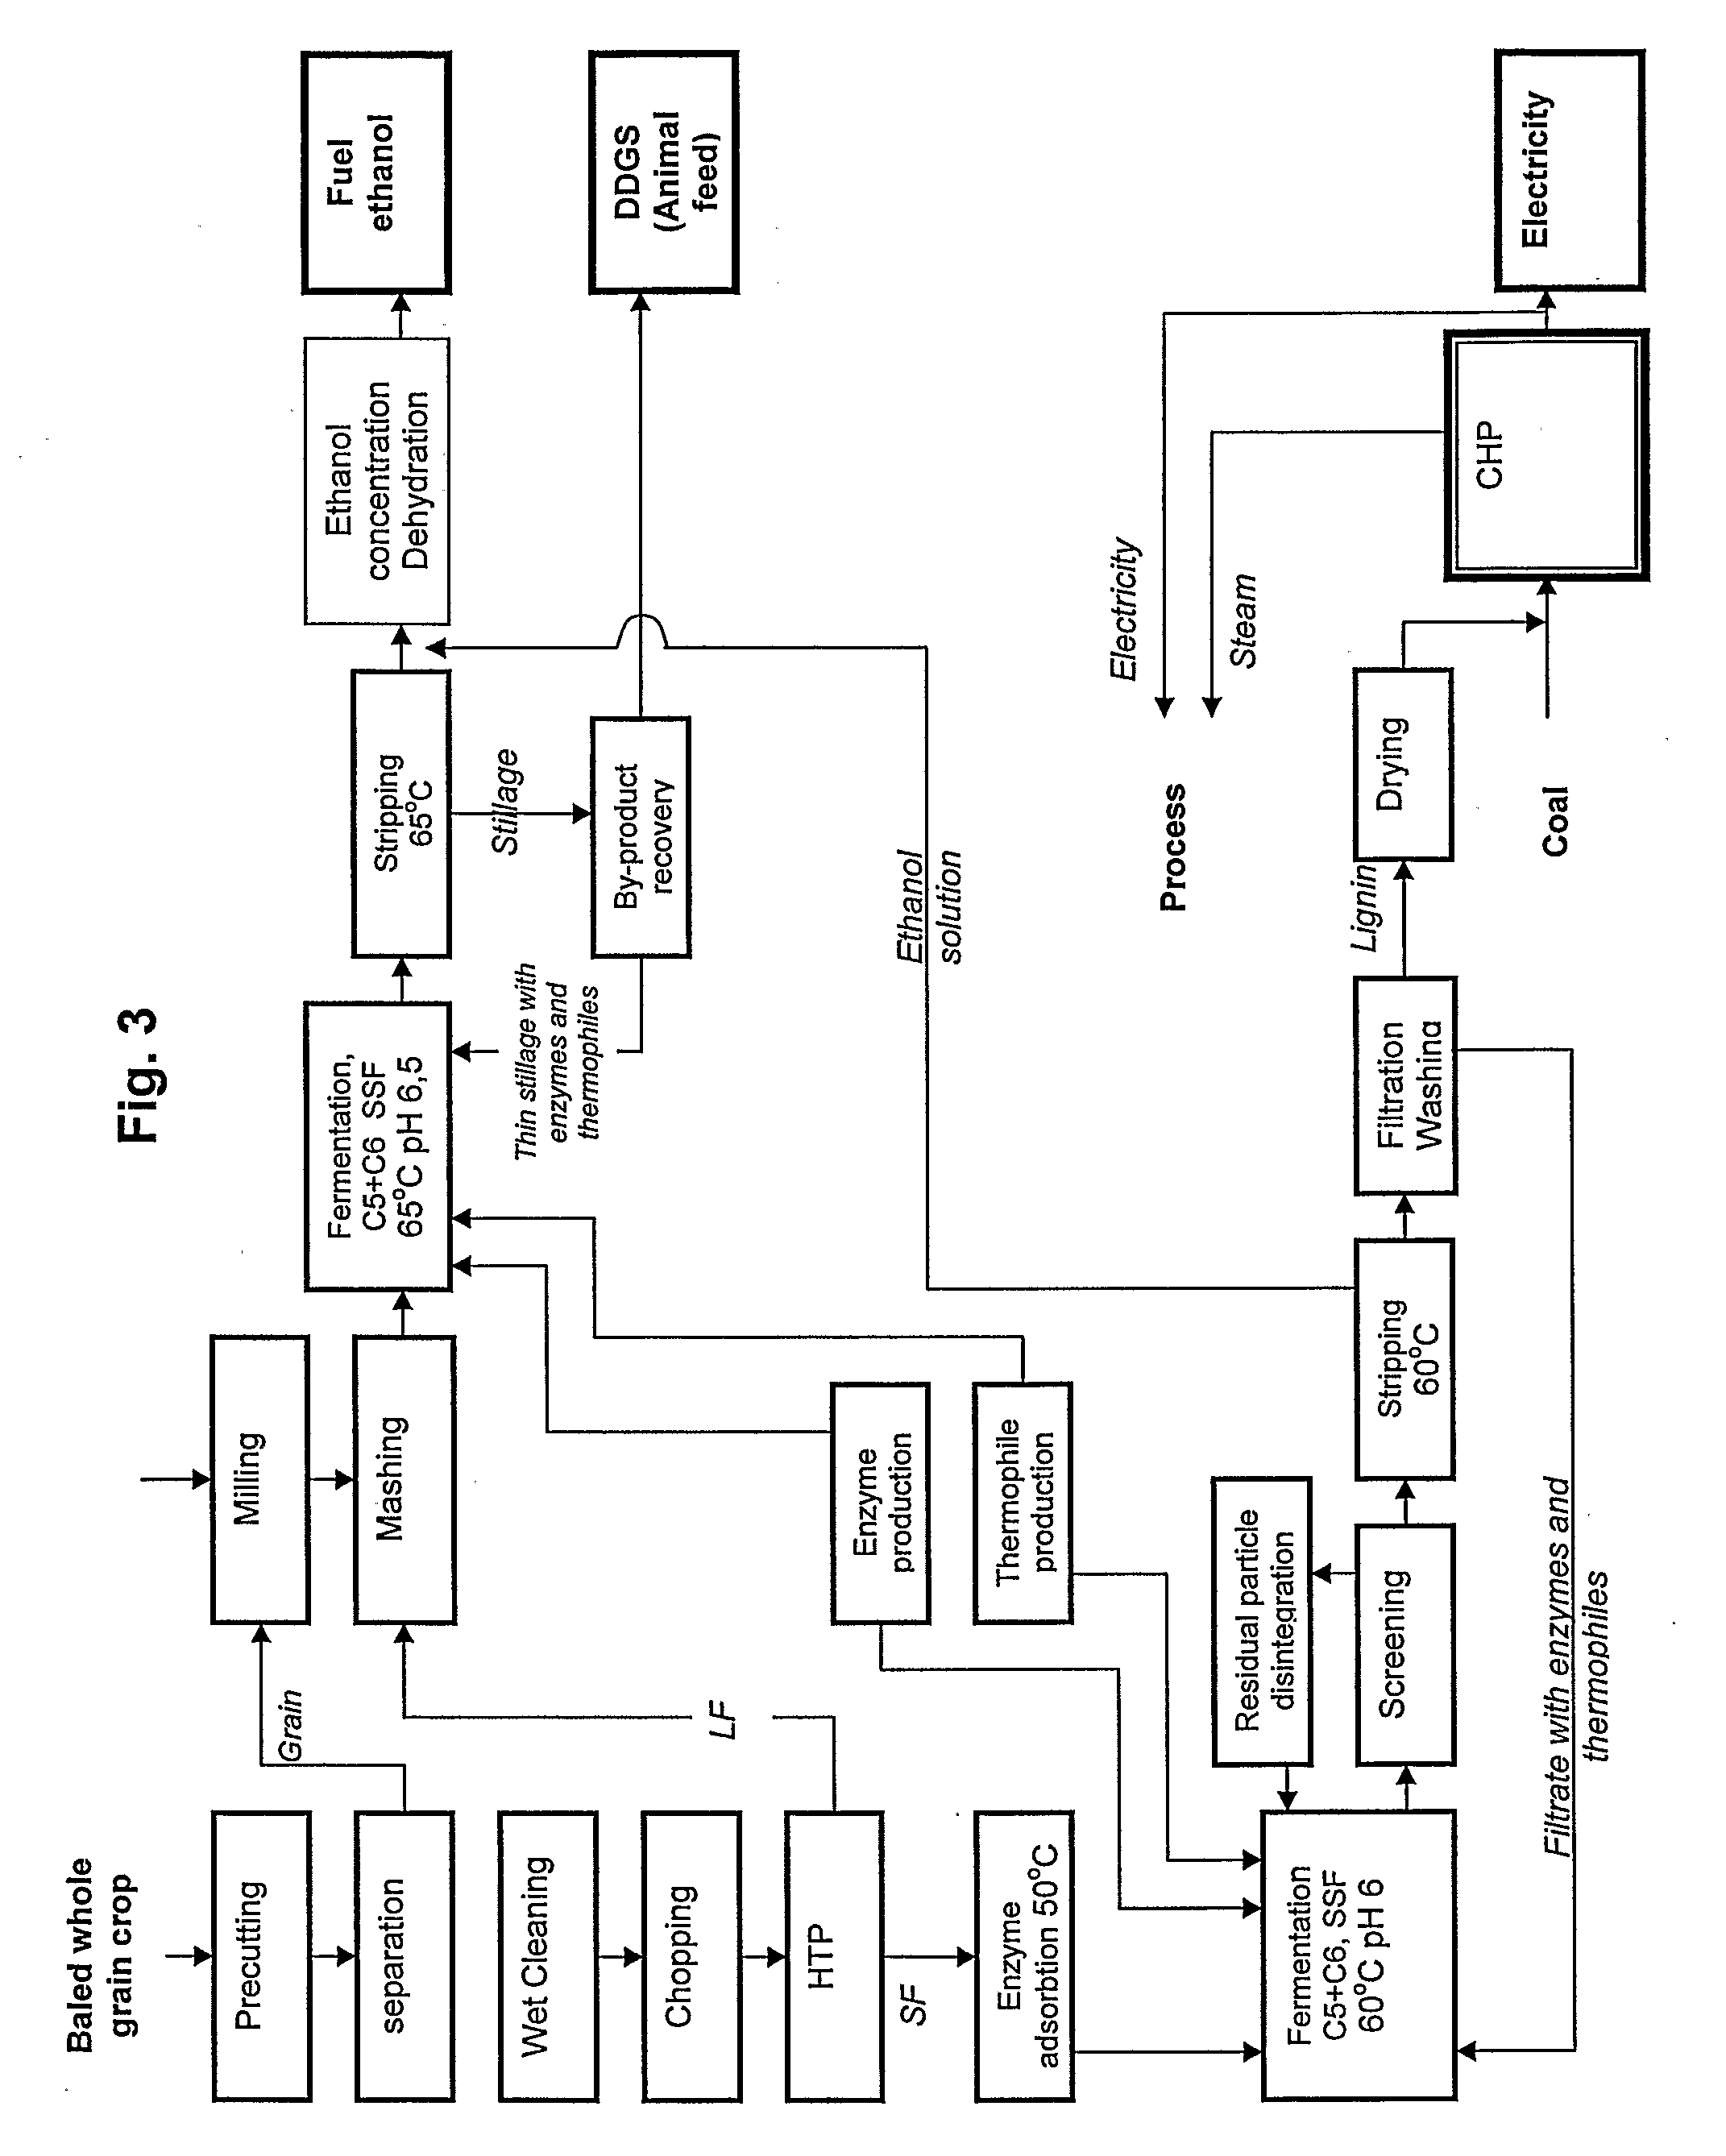 Method and apparatus for conversion of cellulosic material to ethanol